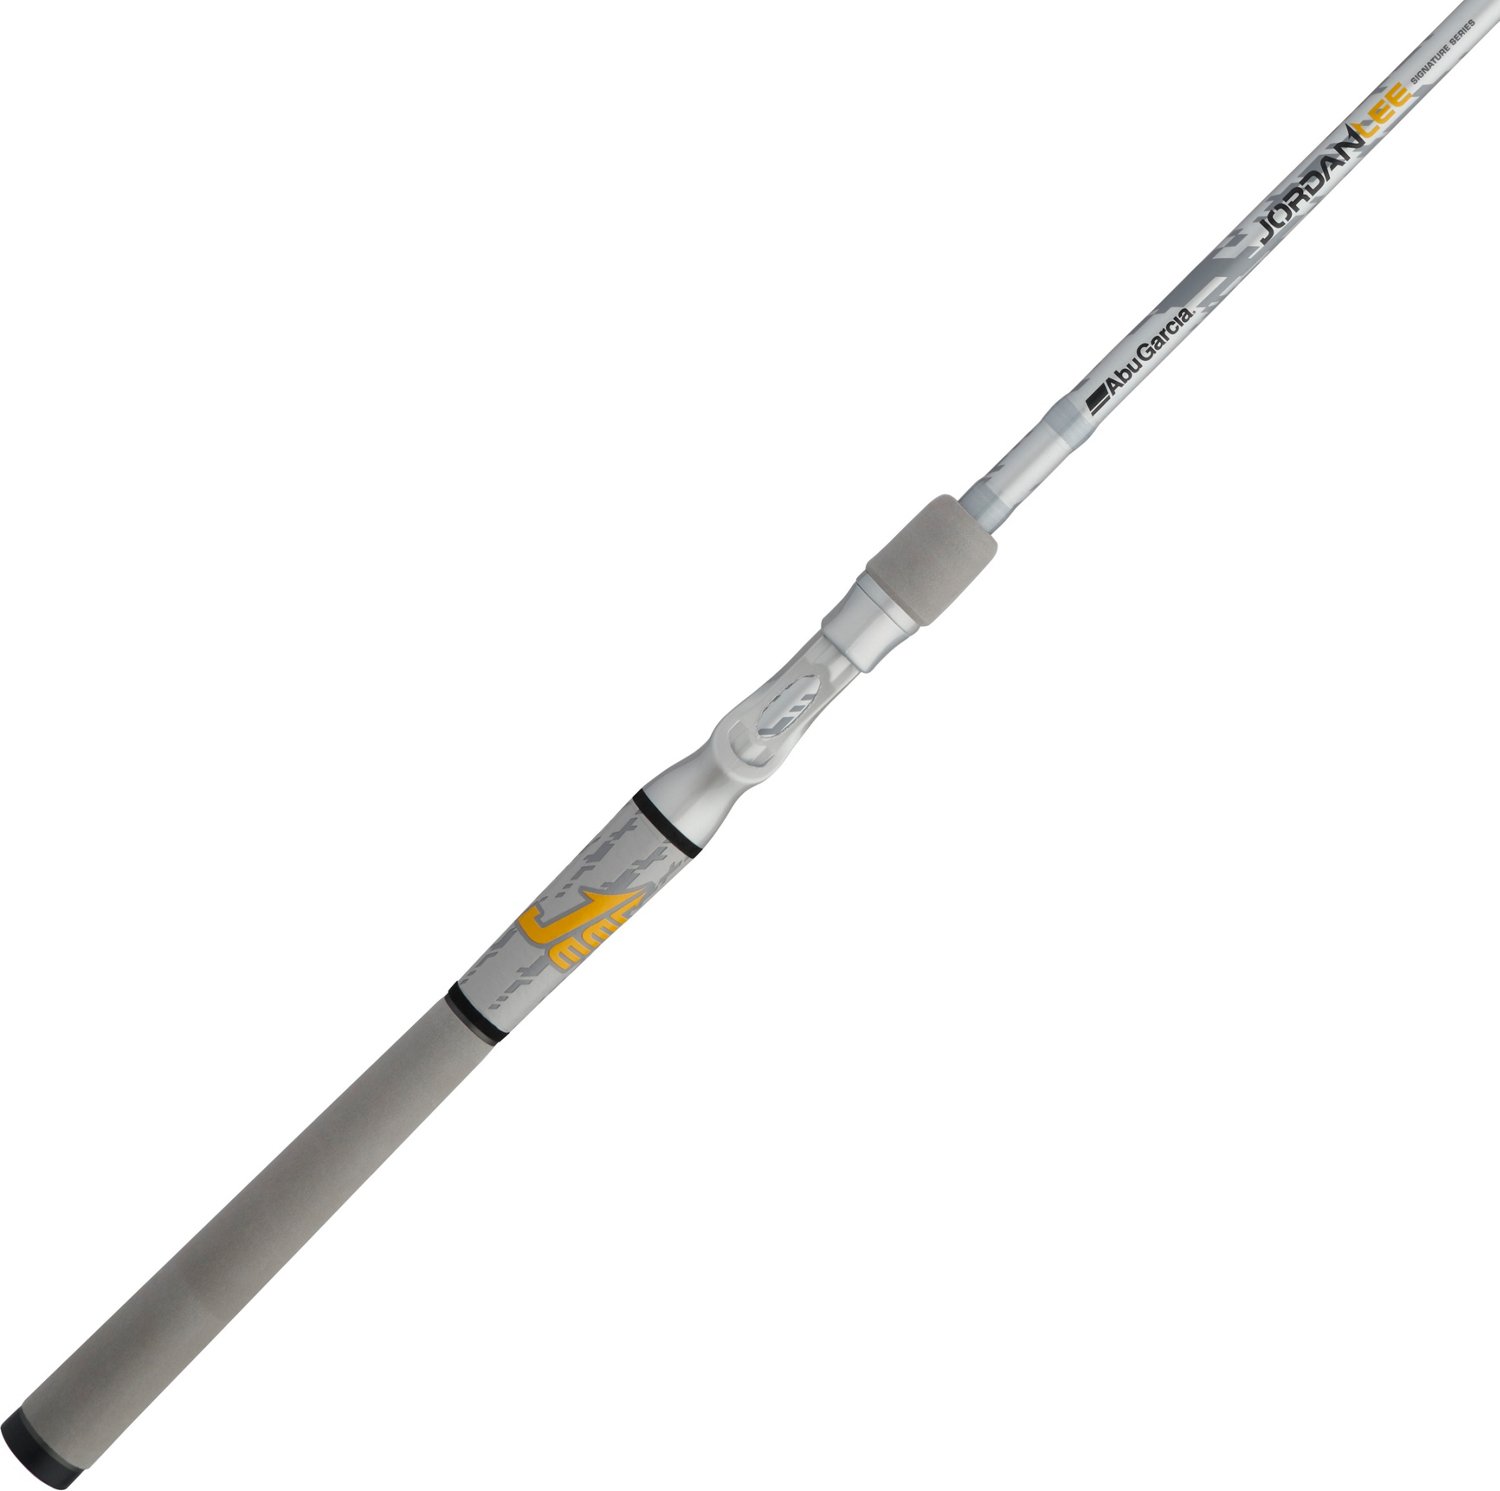  Abu Garcia 7' Jordan Lee Fishing Rod and Reel Baitcast Combo,  5 +1 Ball Bearings with Lightweight Graphite Frame & Sideplates, Durable  Construction,Yellow/Grey : Sports & Outdoors